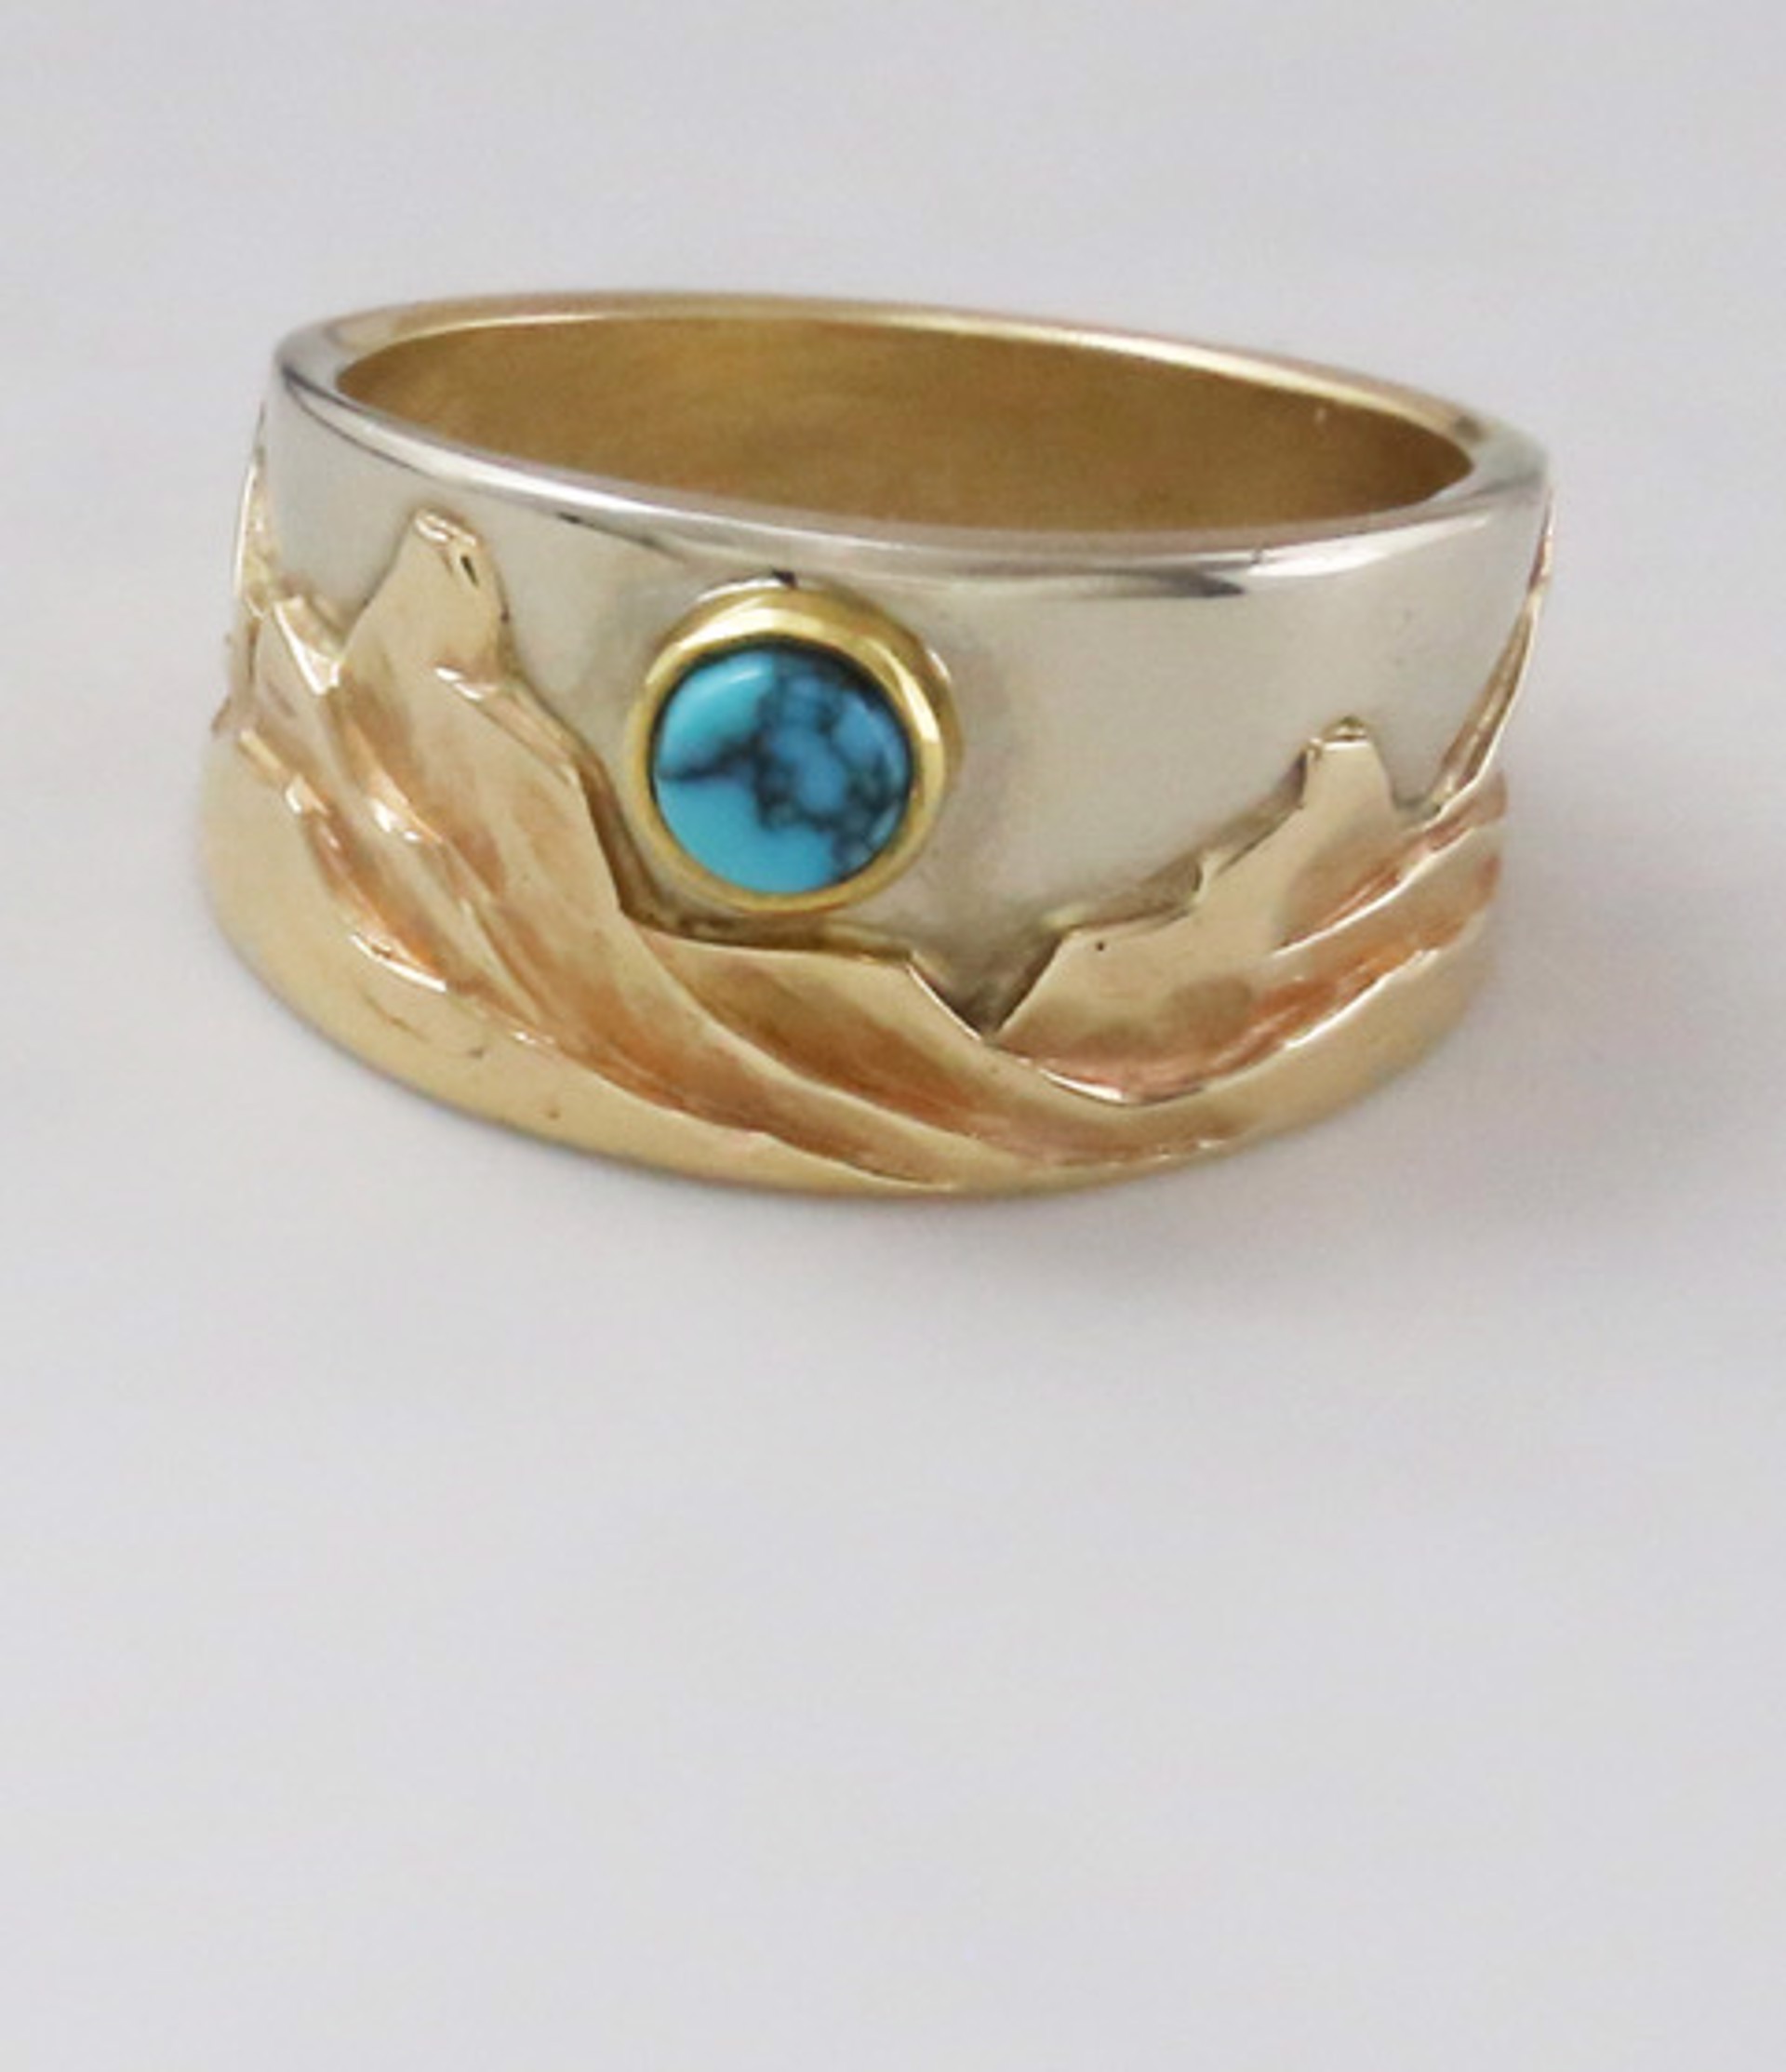 Ring - "Mountain Band" - 14K With Morenci Turquoise - Can Be Sized - 030 by Ken and Barbara Newman